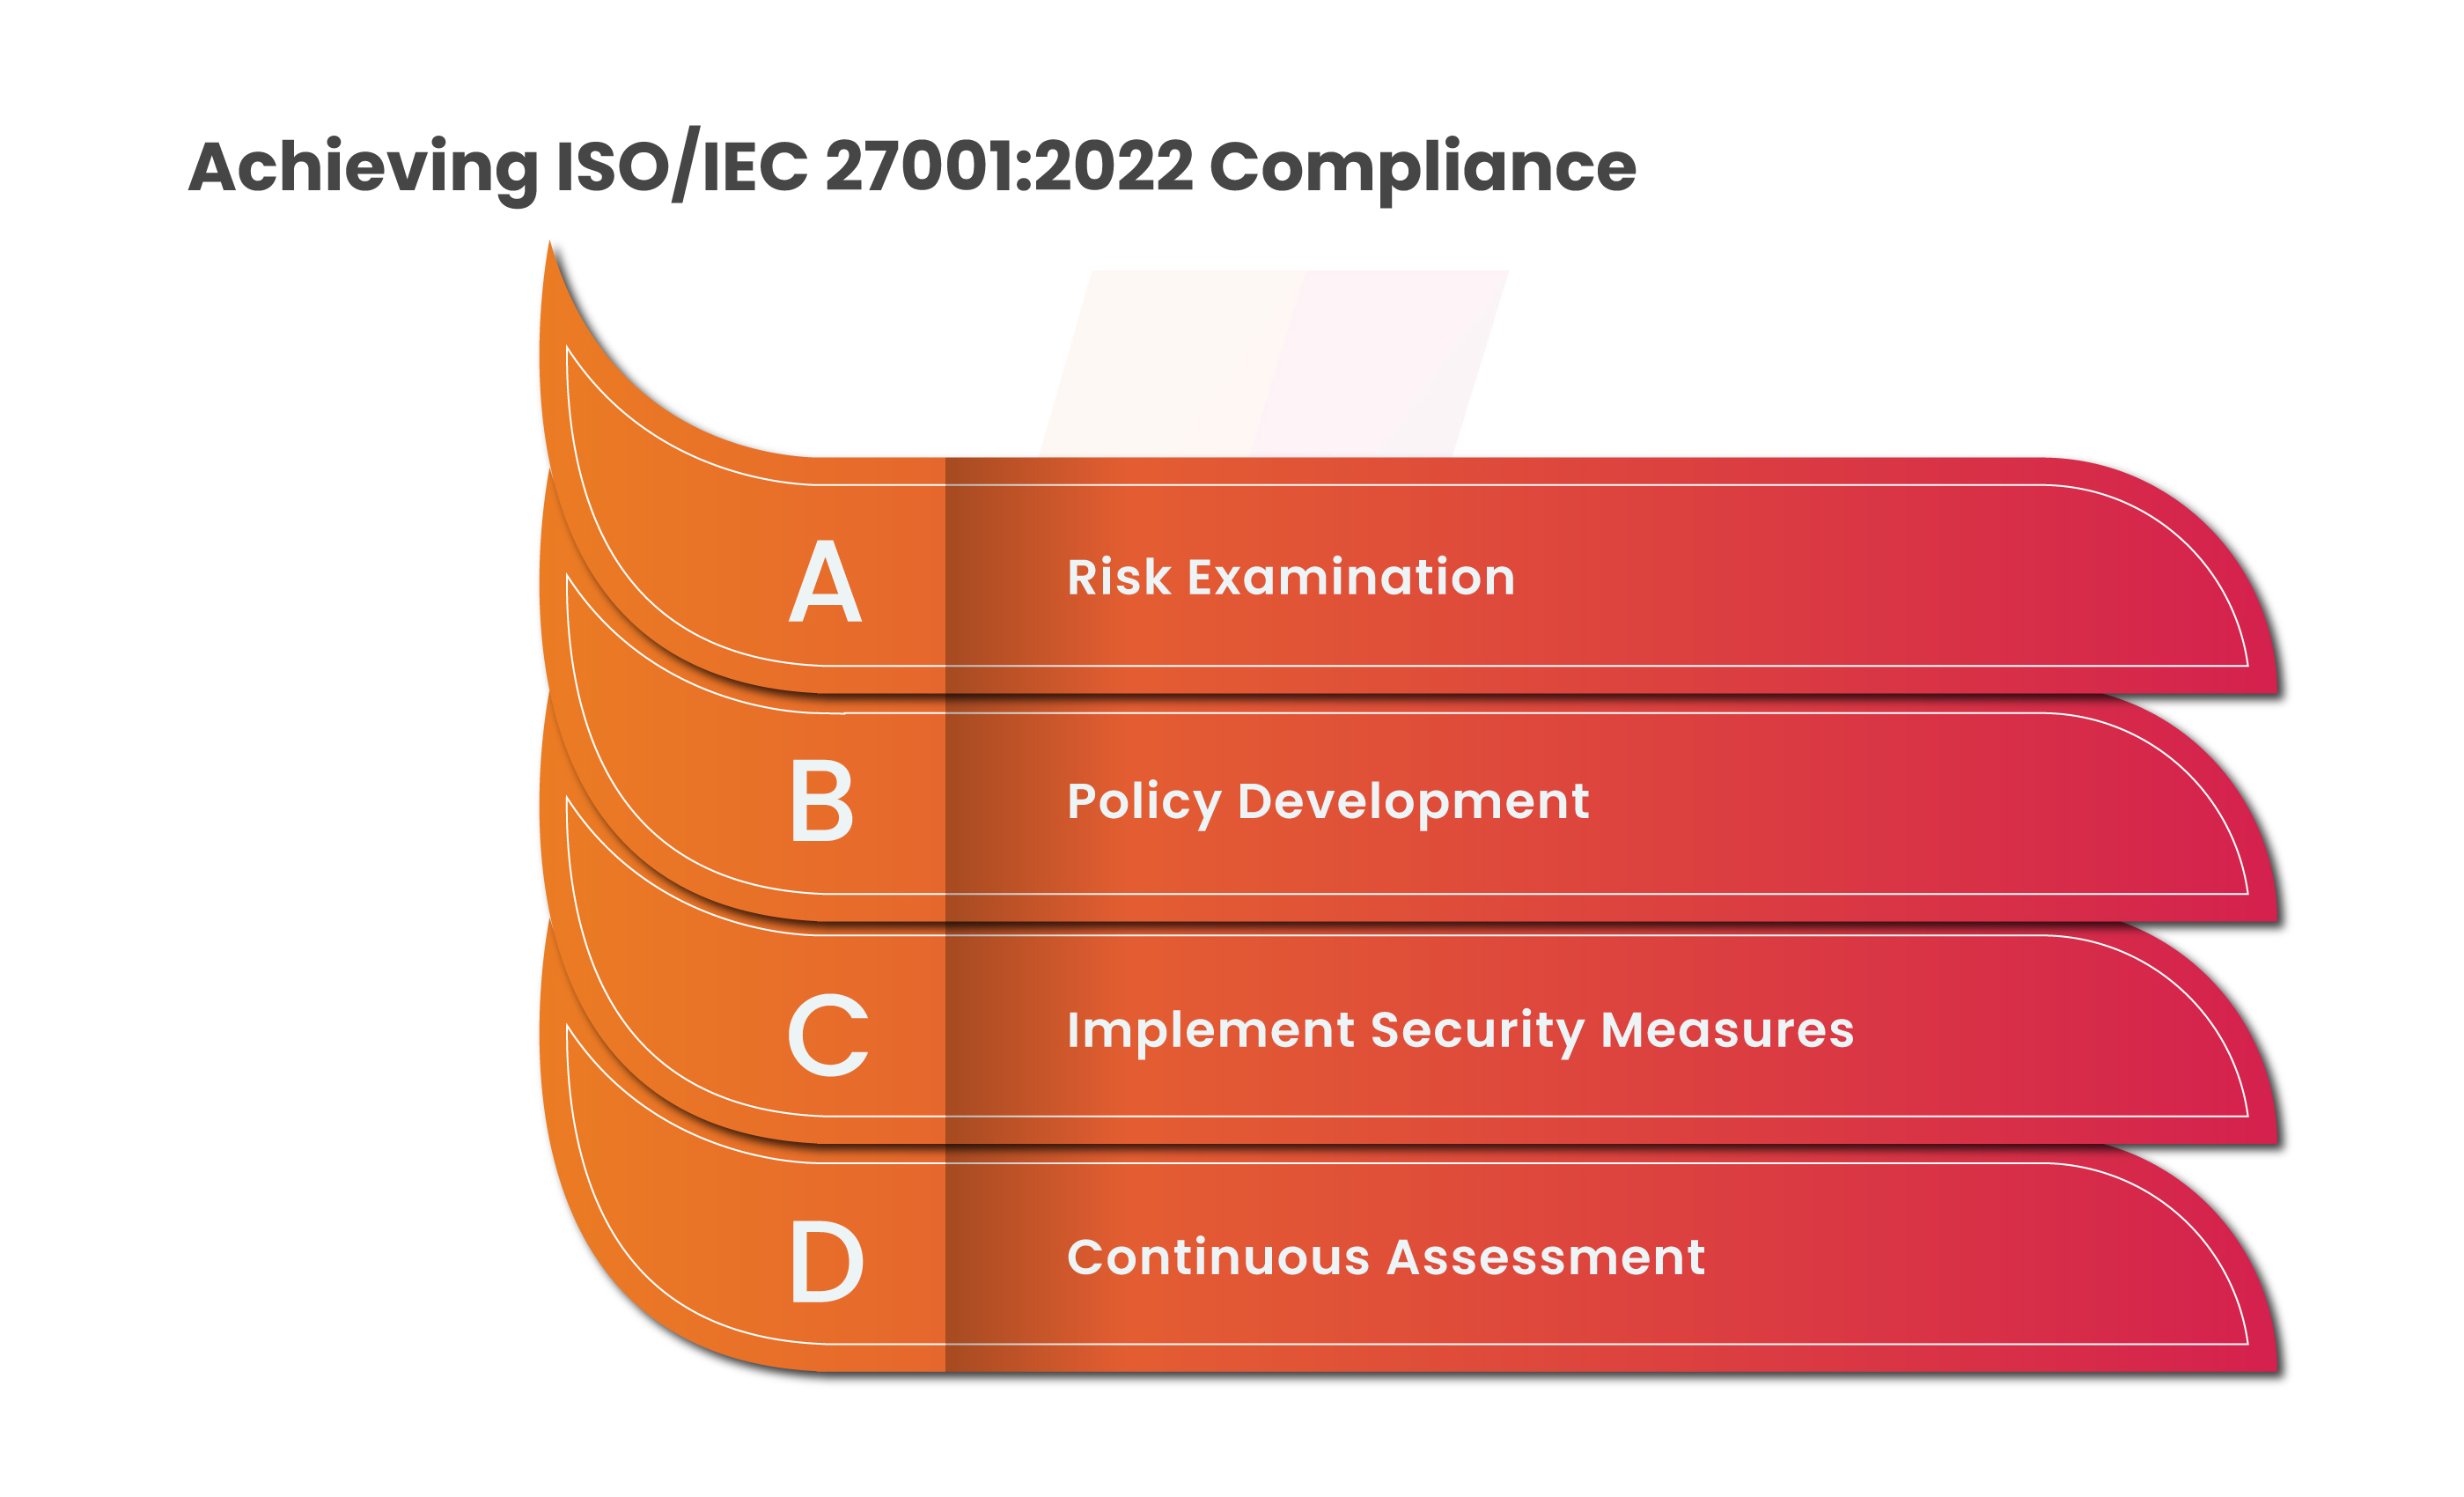 Achieving ISO 27001:2022 Compliance